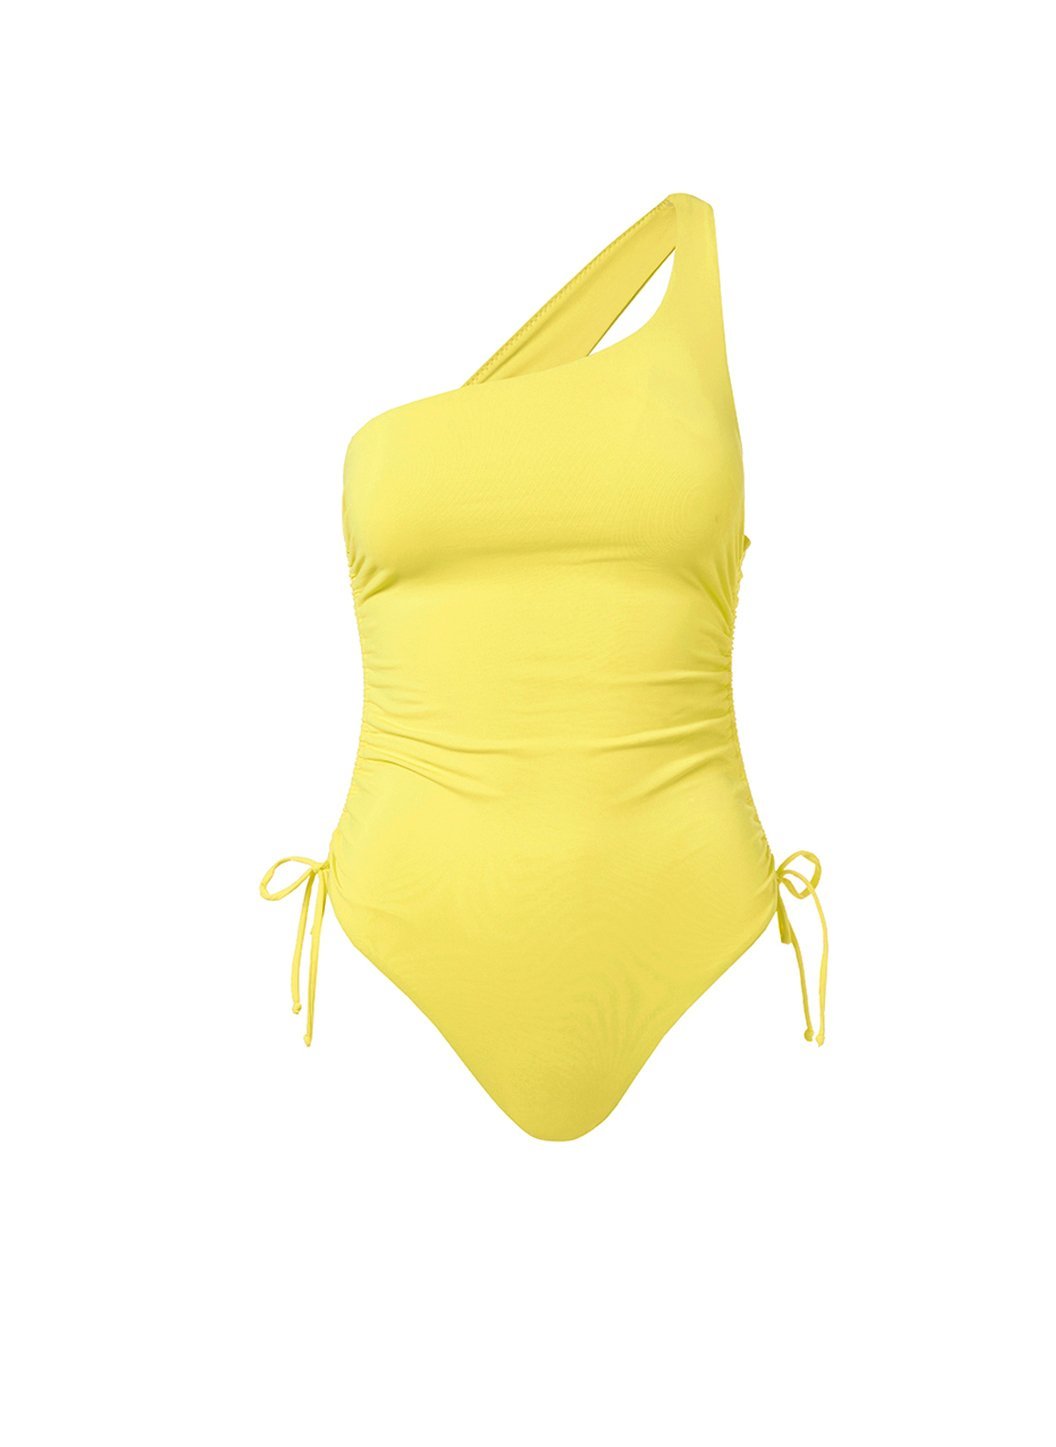 polynesia yellow oneshoulder ruched onepiece swimsuit 2019